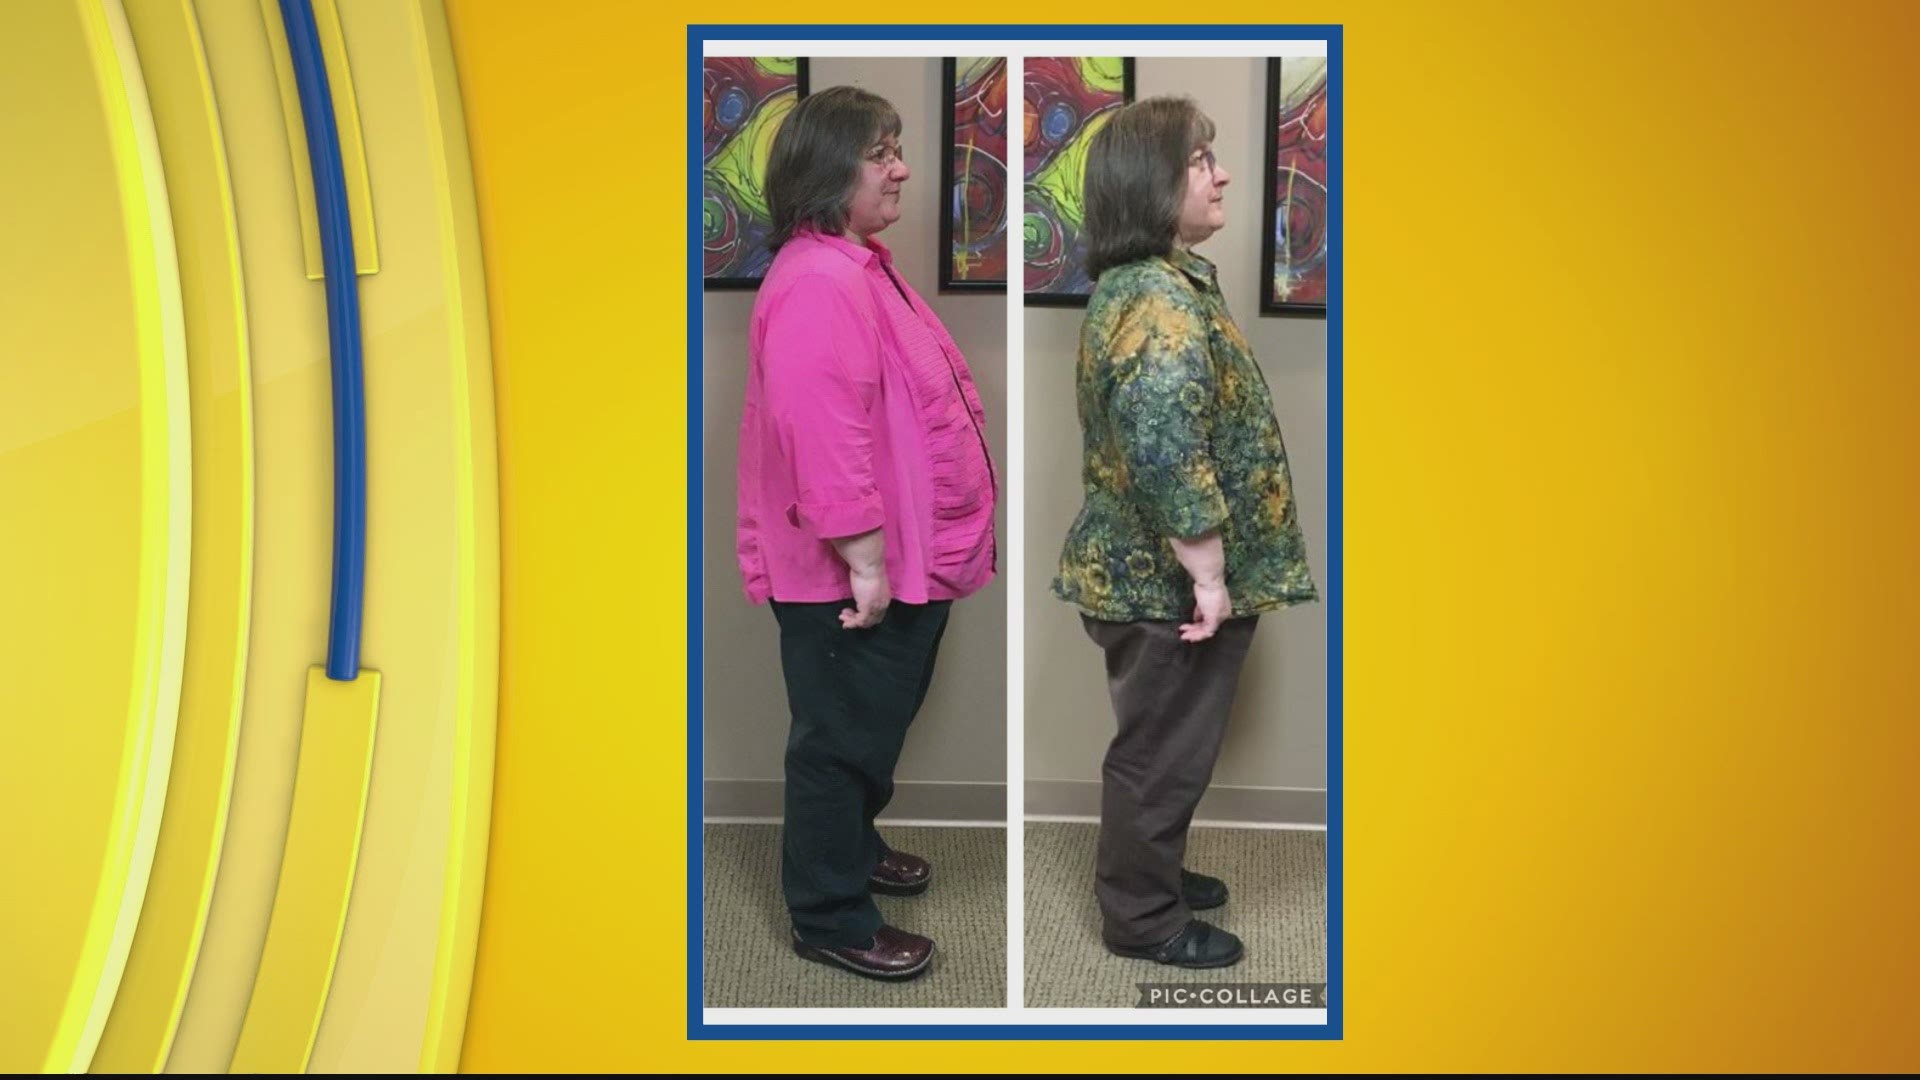 Meet Robin who has lost over 50 pounds already with ChiroTHIN